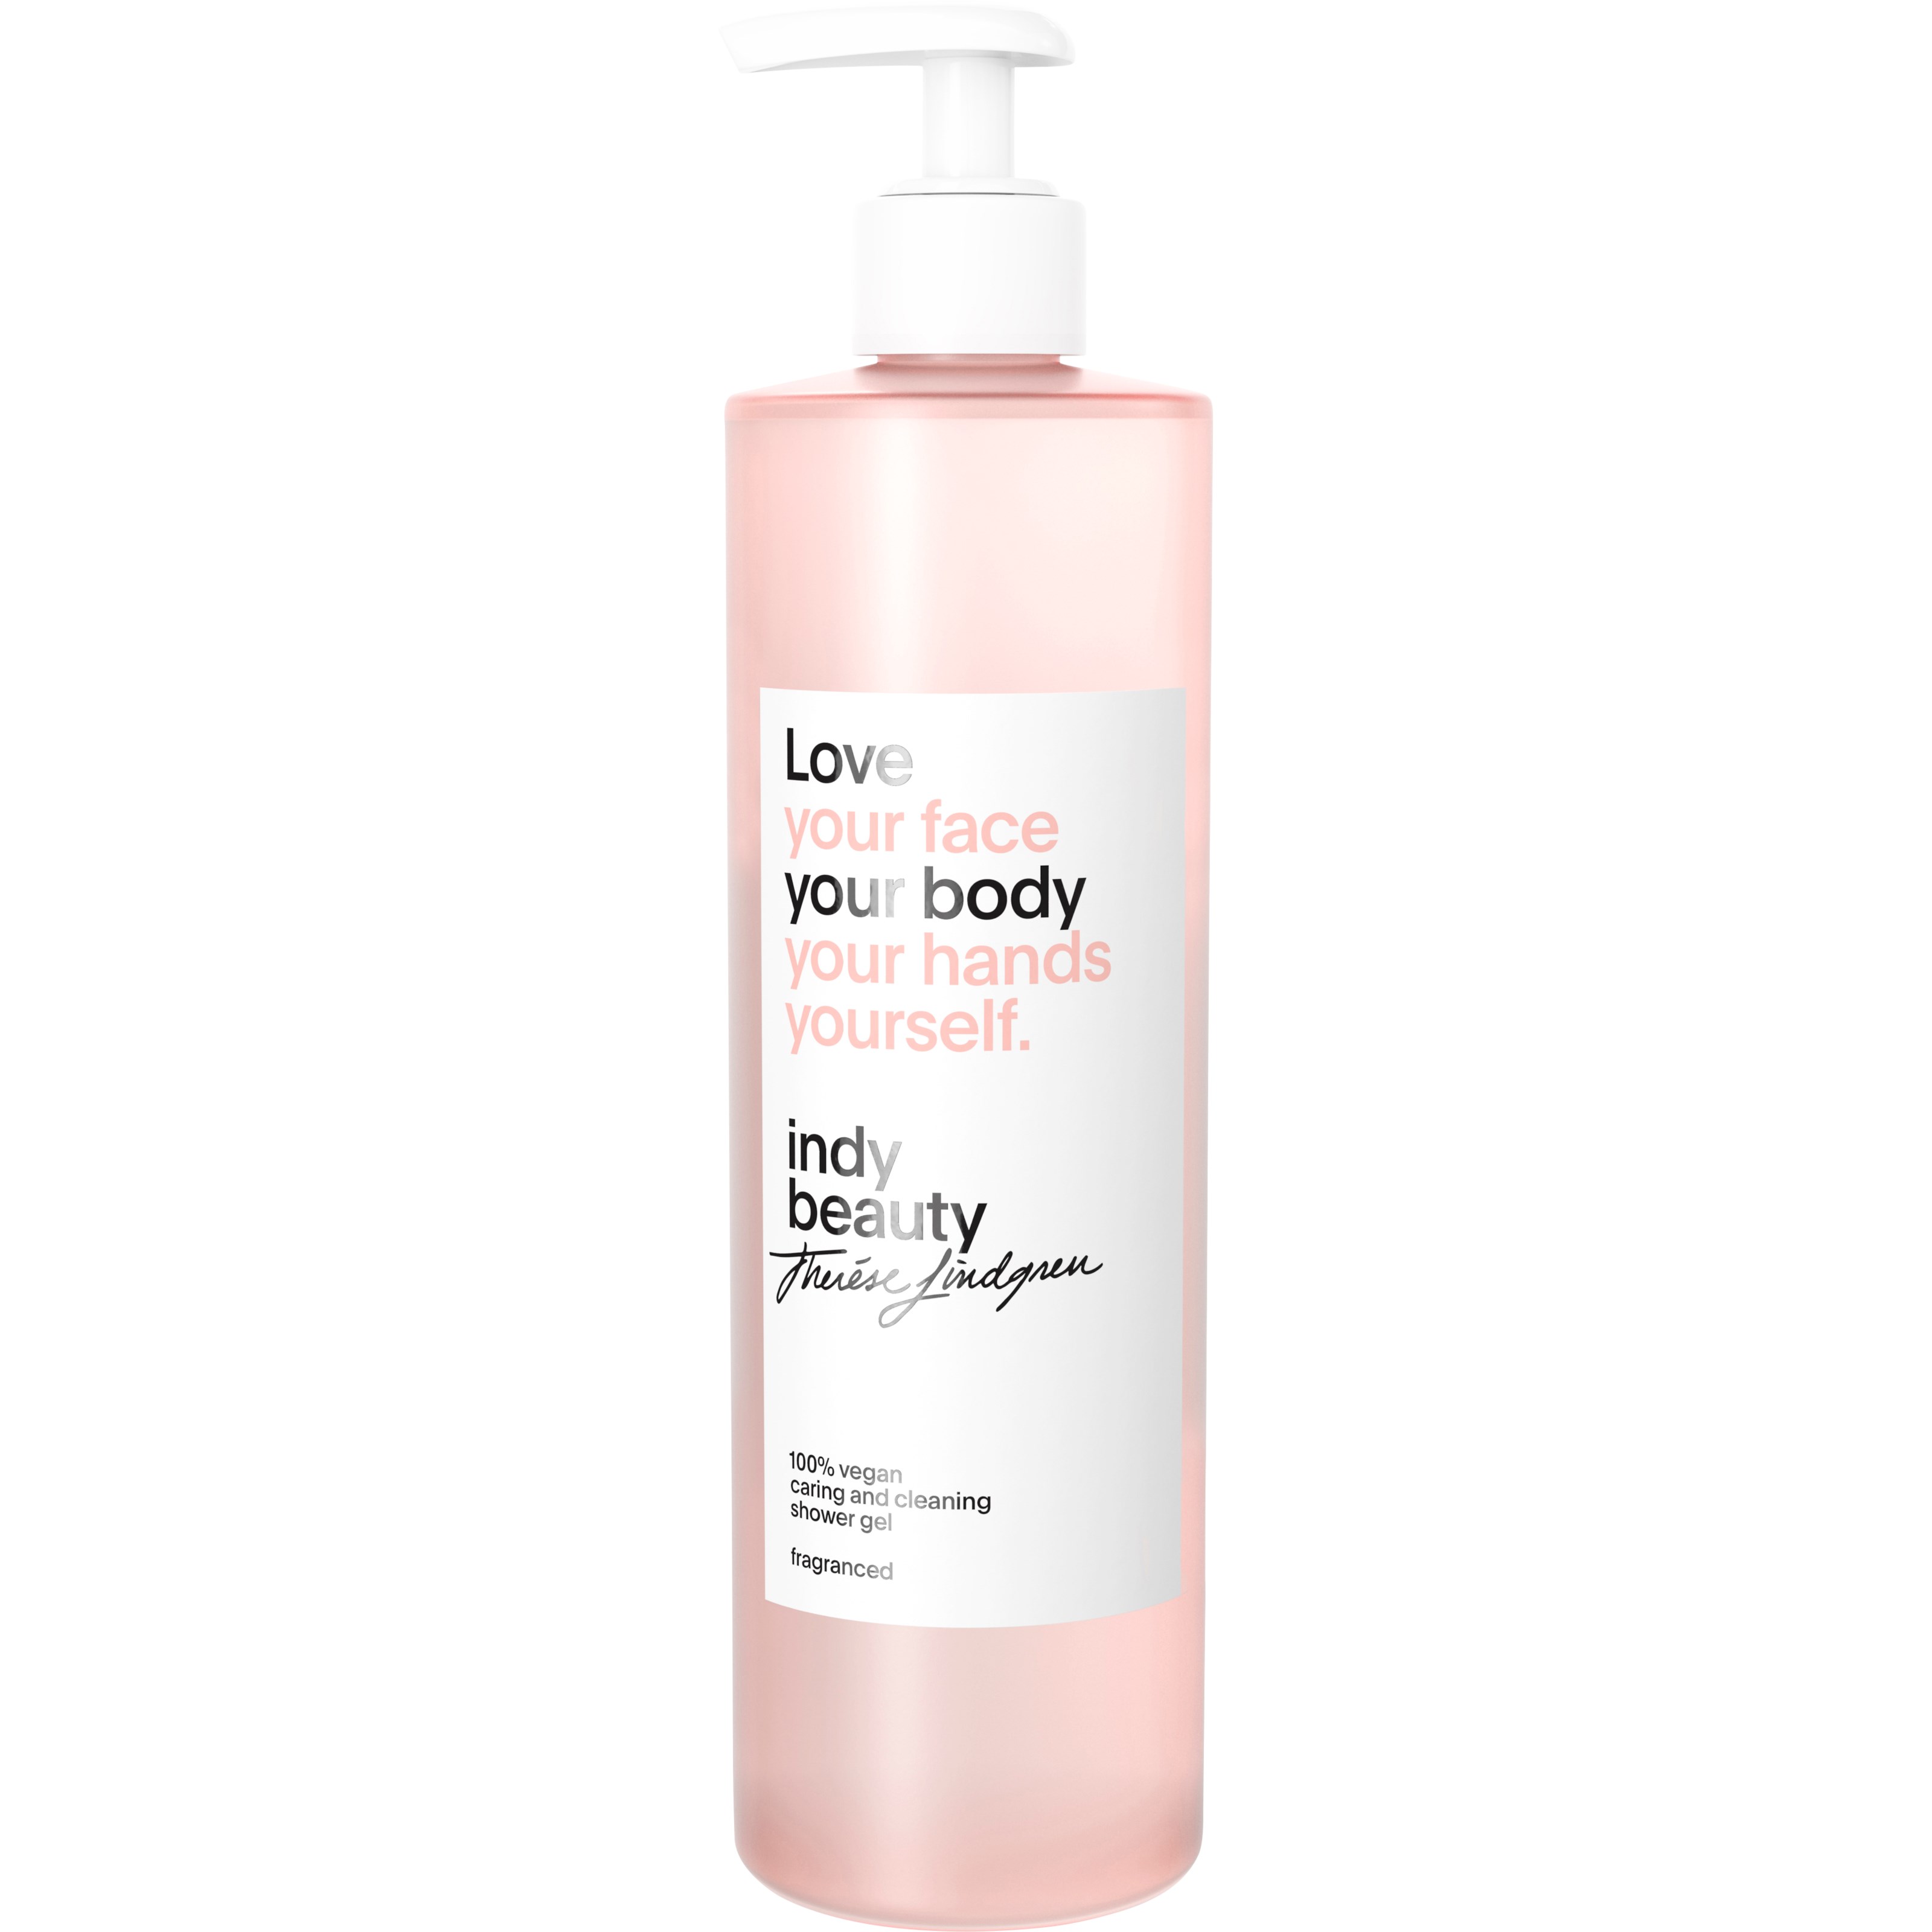 Indy Beauty Caring and Cleaning Shower Gel, 400 ml